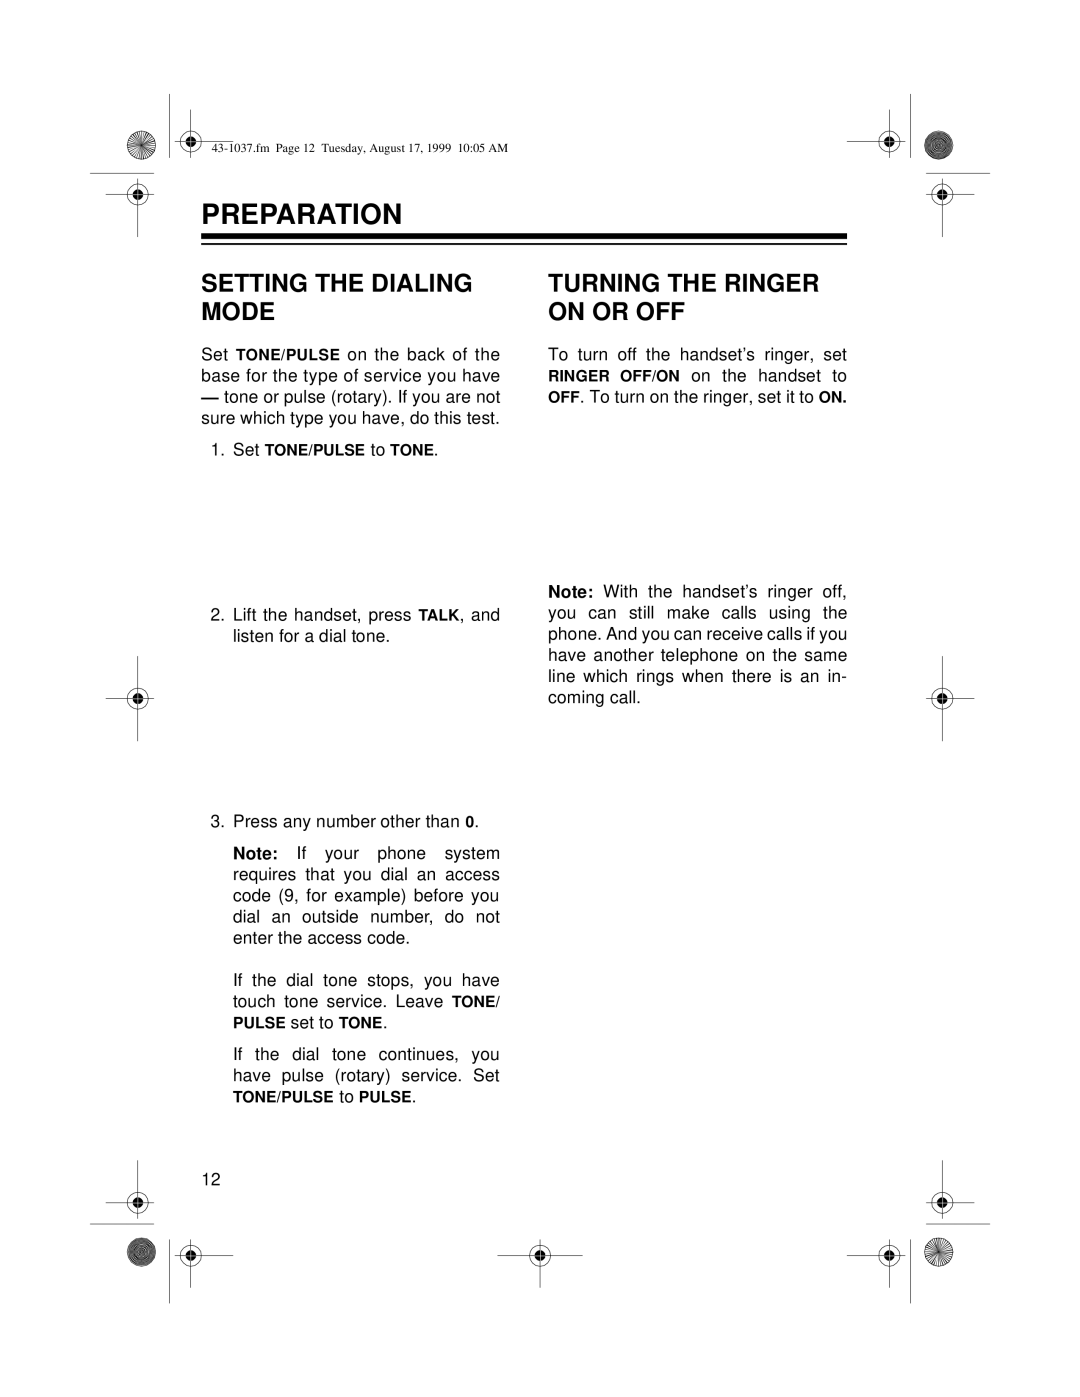 Radio Shack ET-537 owner manual Preparation, Setting the Dialing Mode, Turning the Ringer on or OFF 